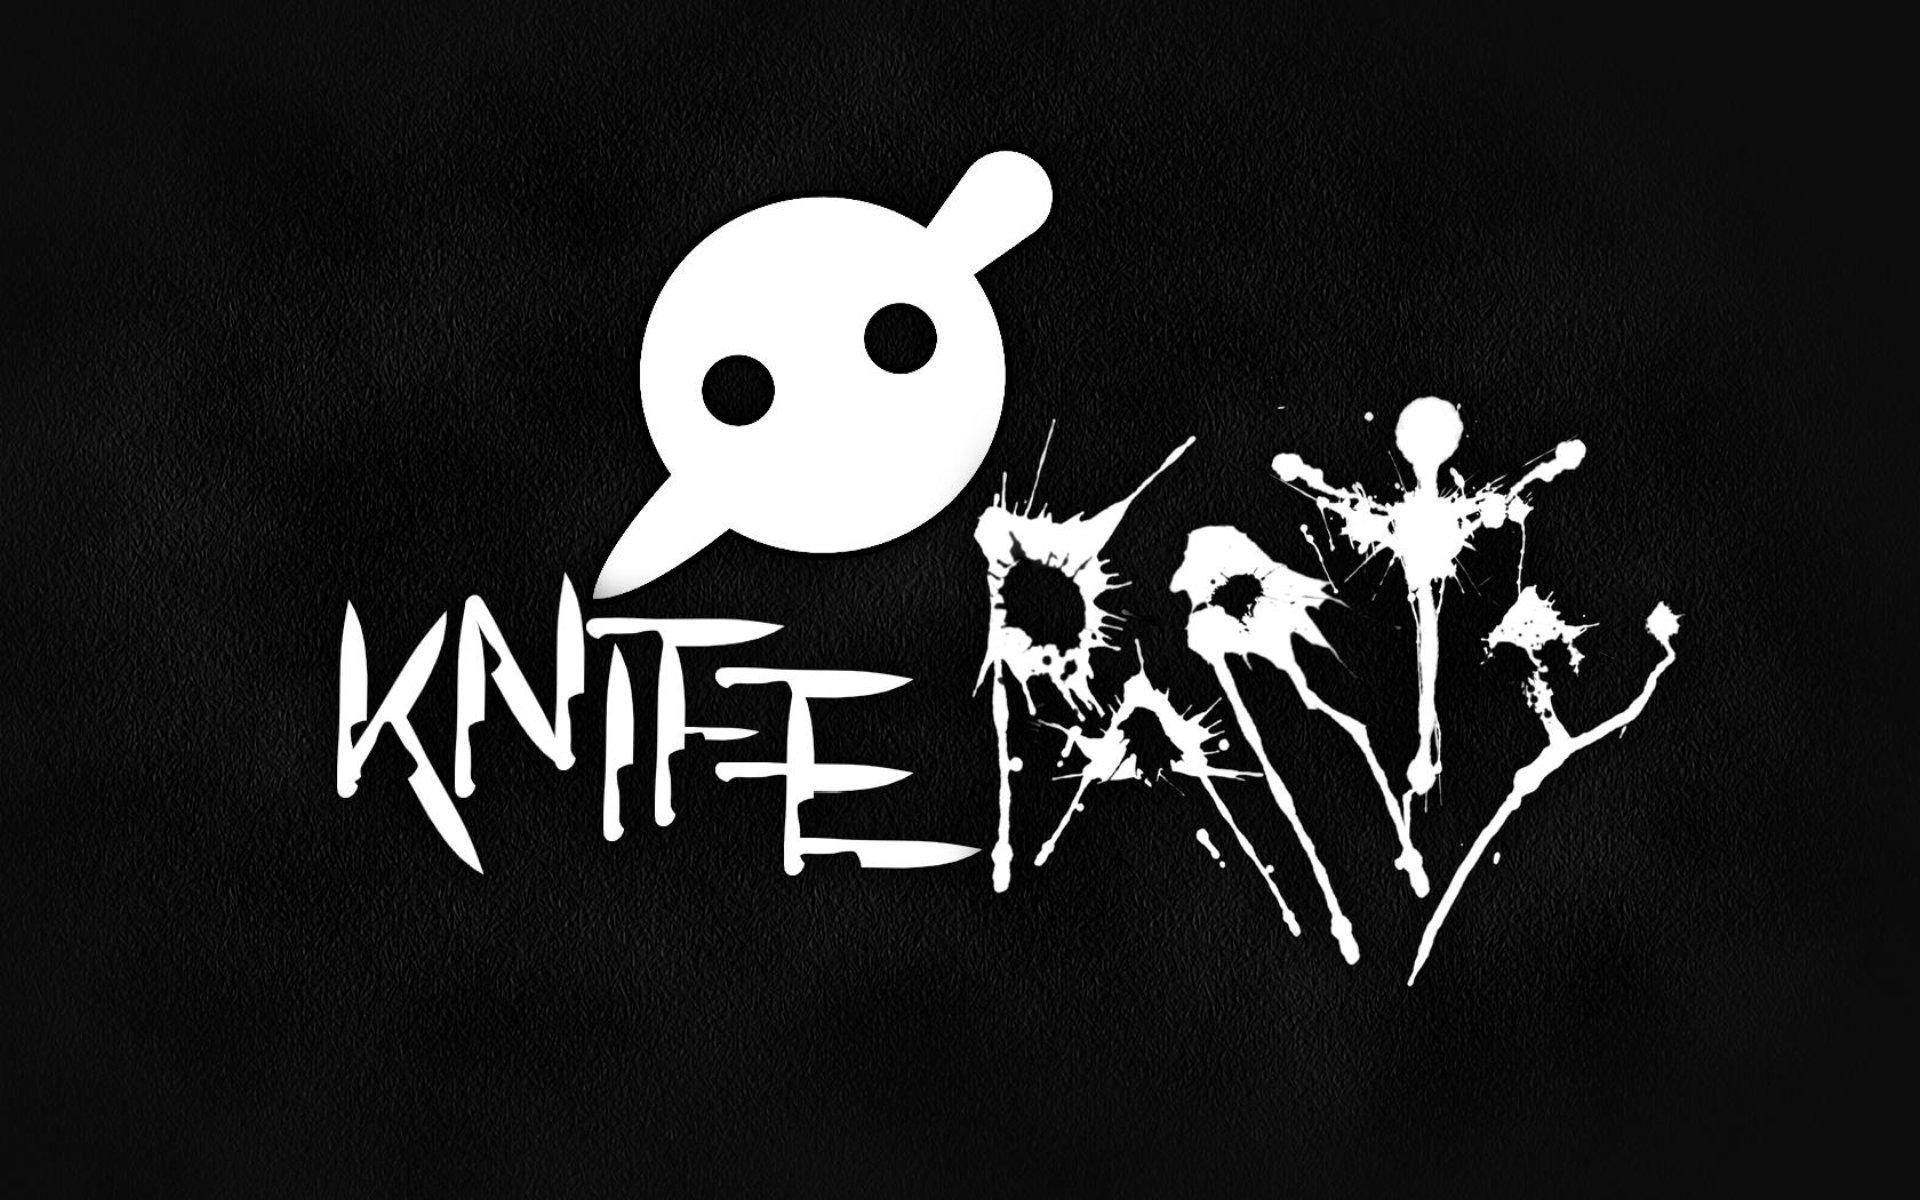 Knife Party Wallpaper Download #D914Y6P